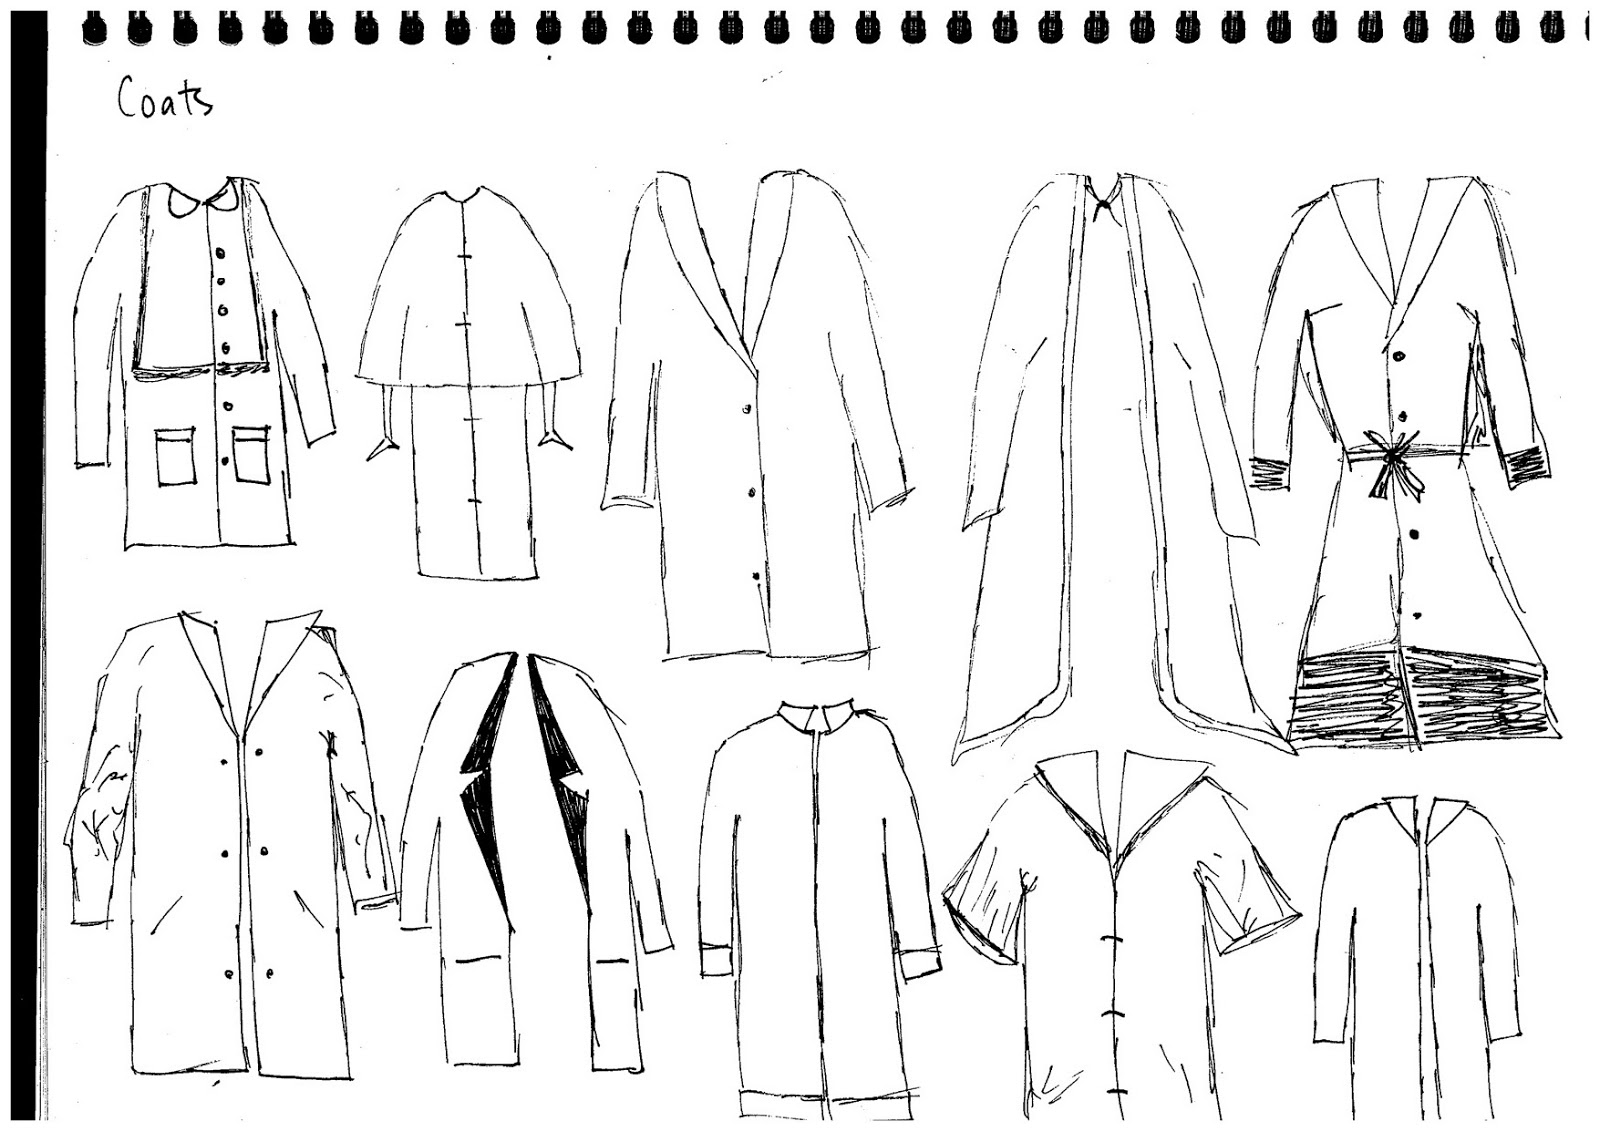 The Remembrance by Kitty Lawrence : Outerwear sketches